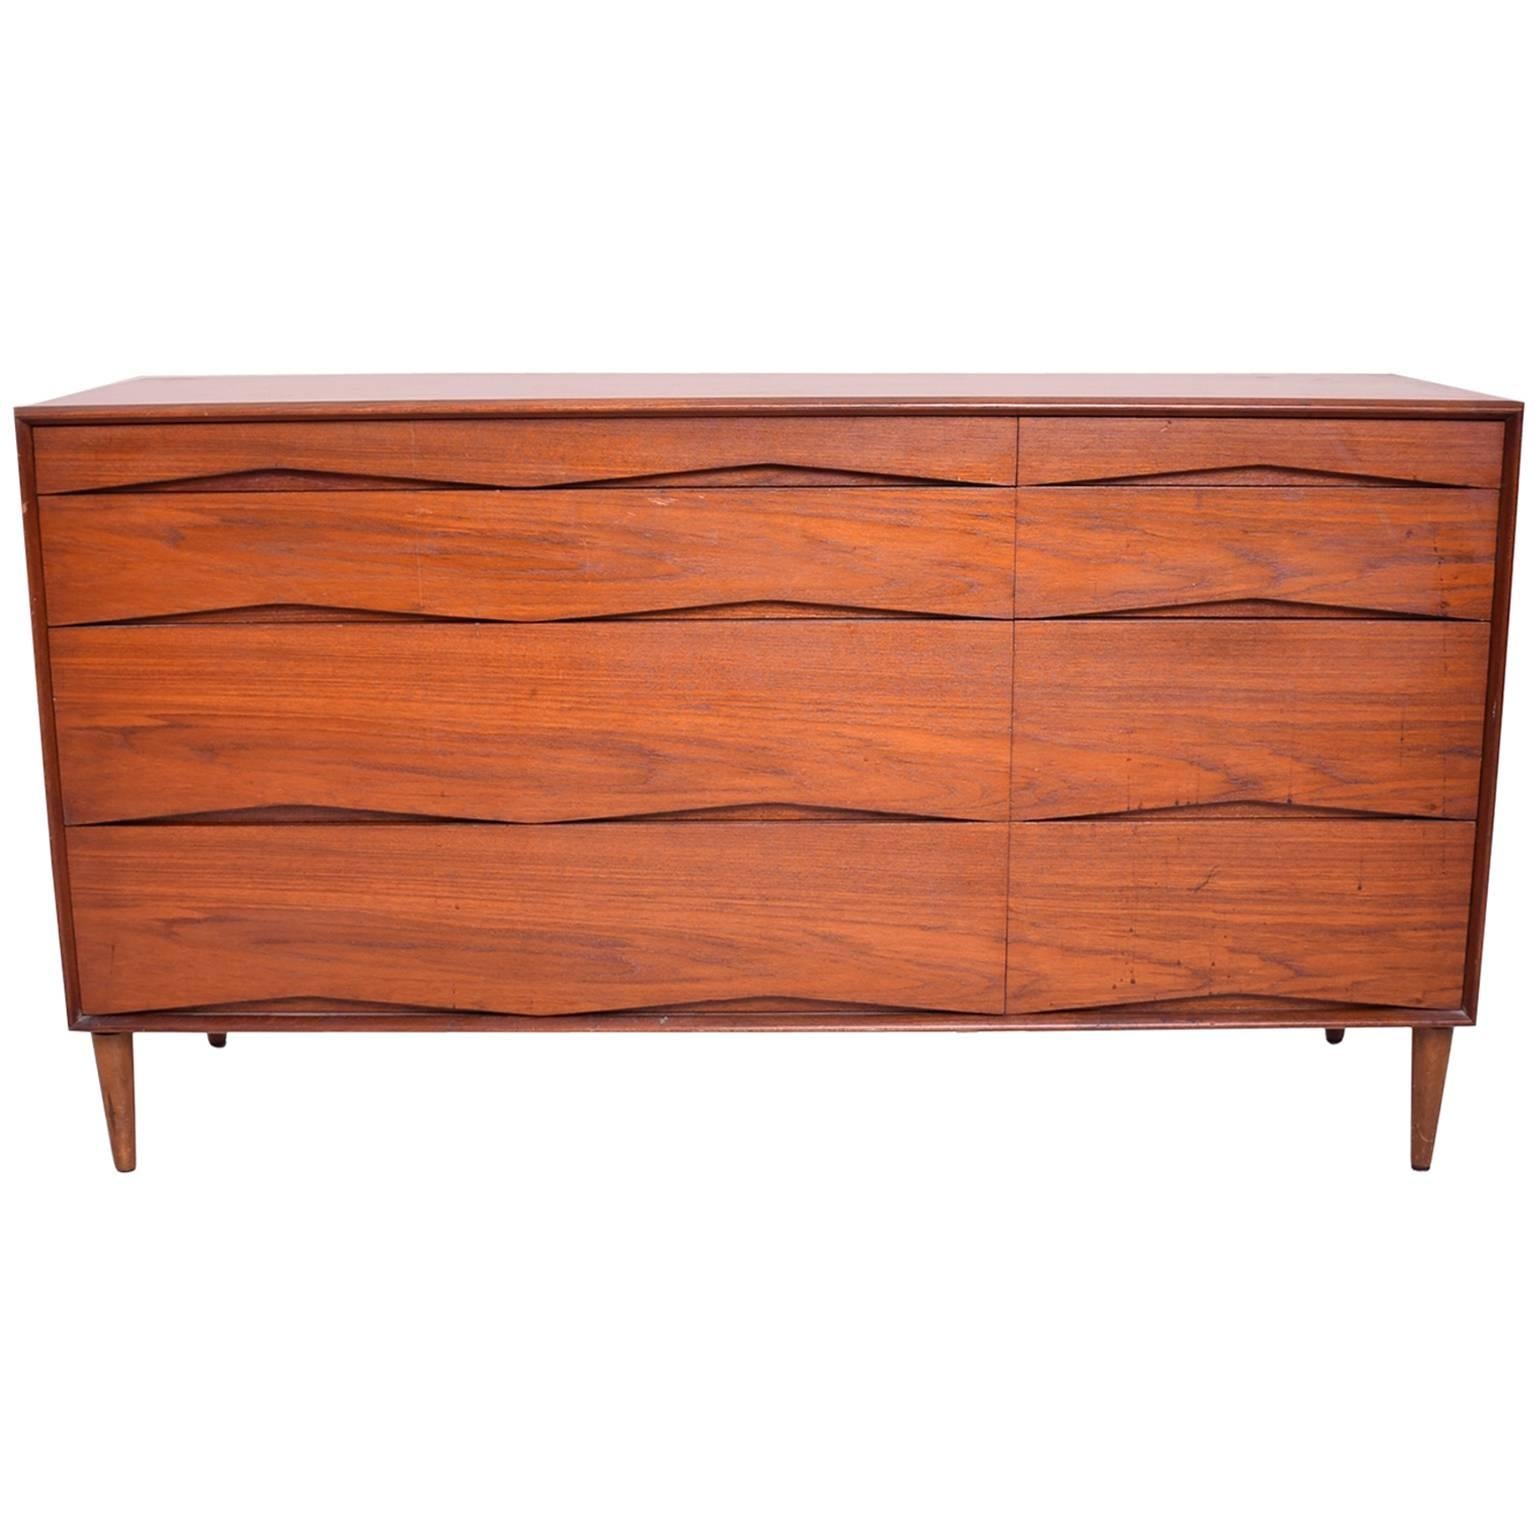 Danish Modern Double Dresser Credenza in the Style of a Vodder